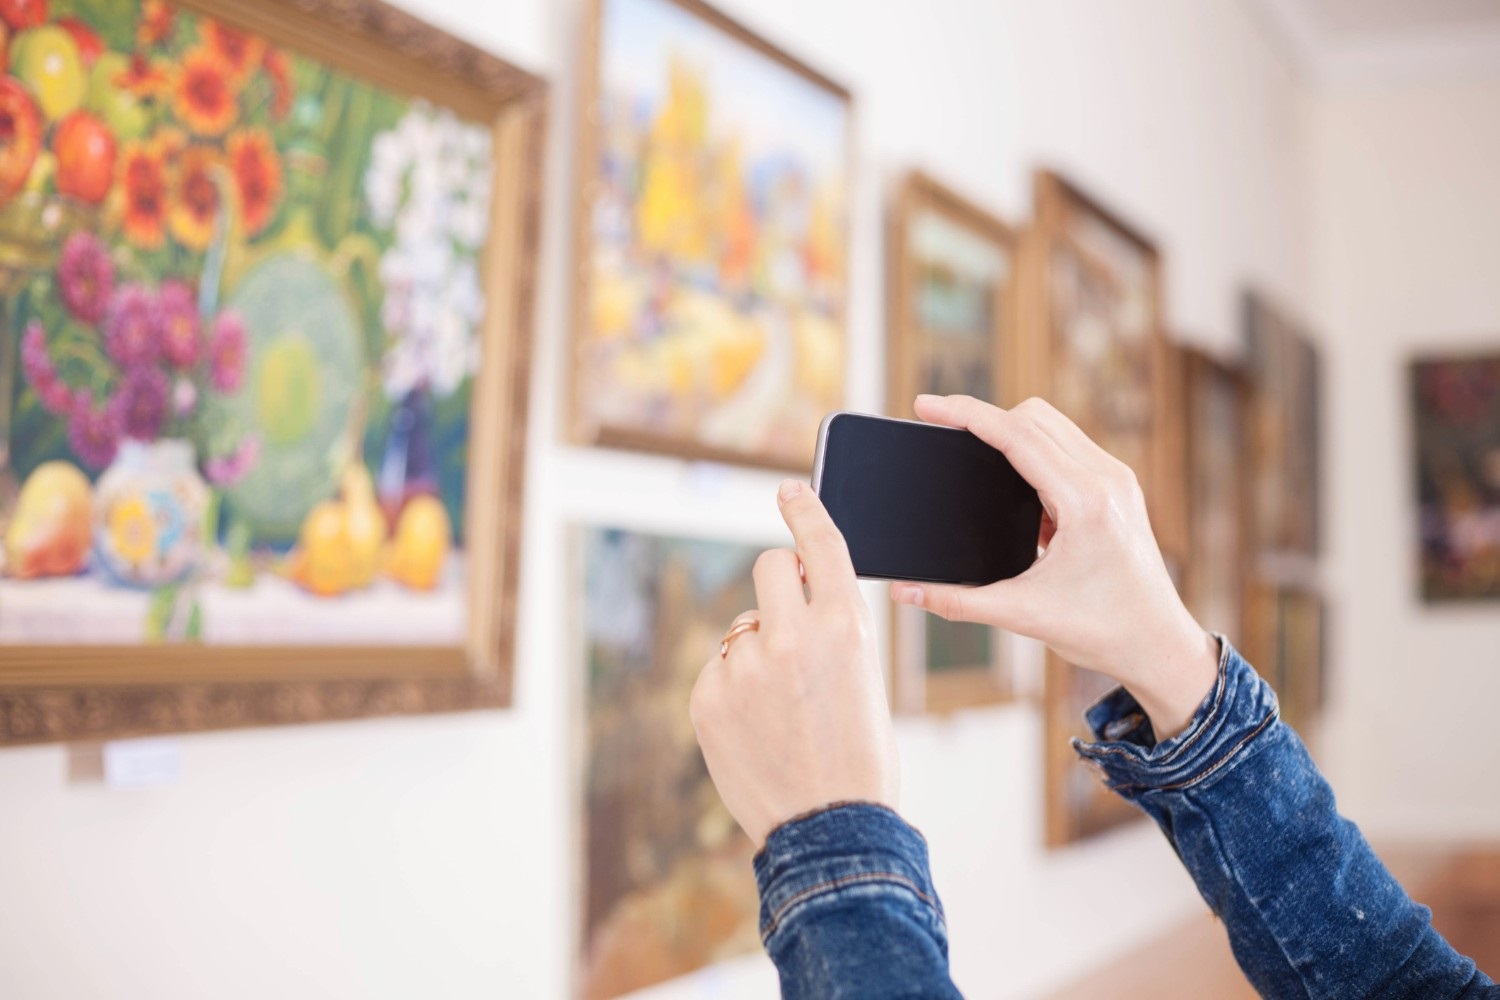 Woman photograph a painting at an exhibition of the art gallery.